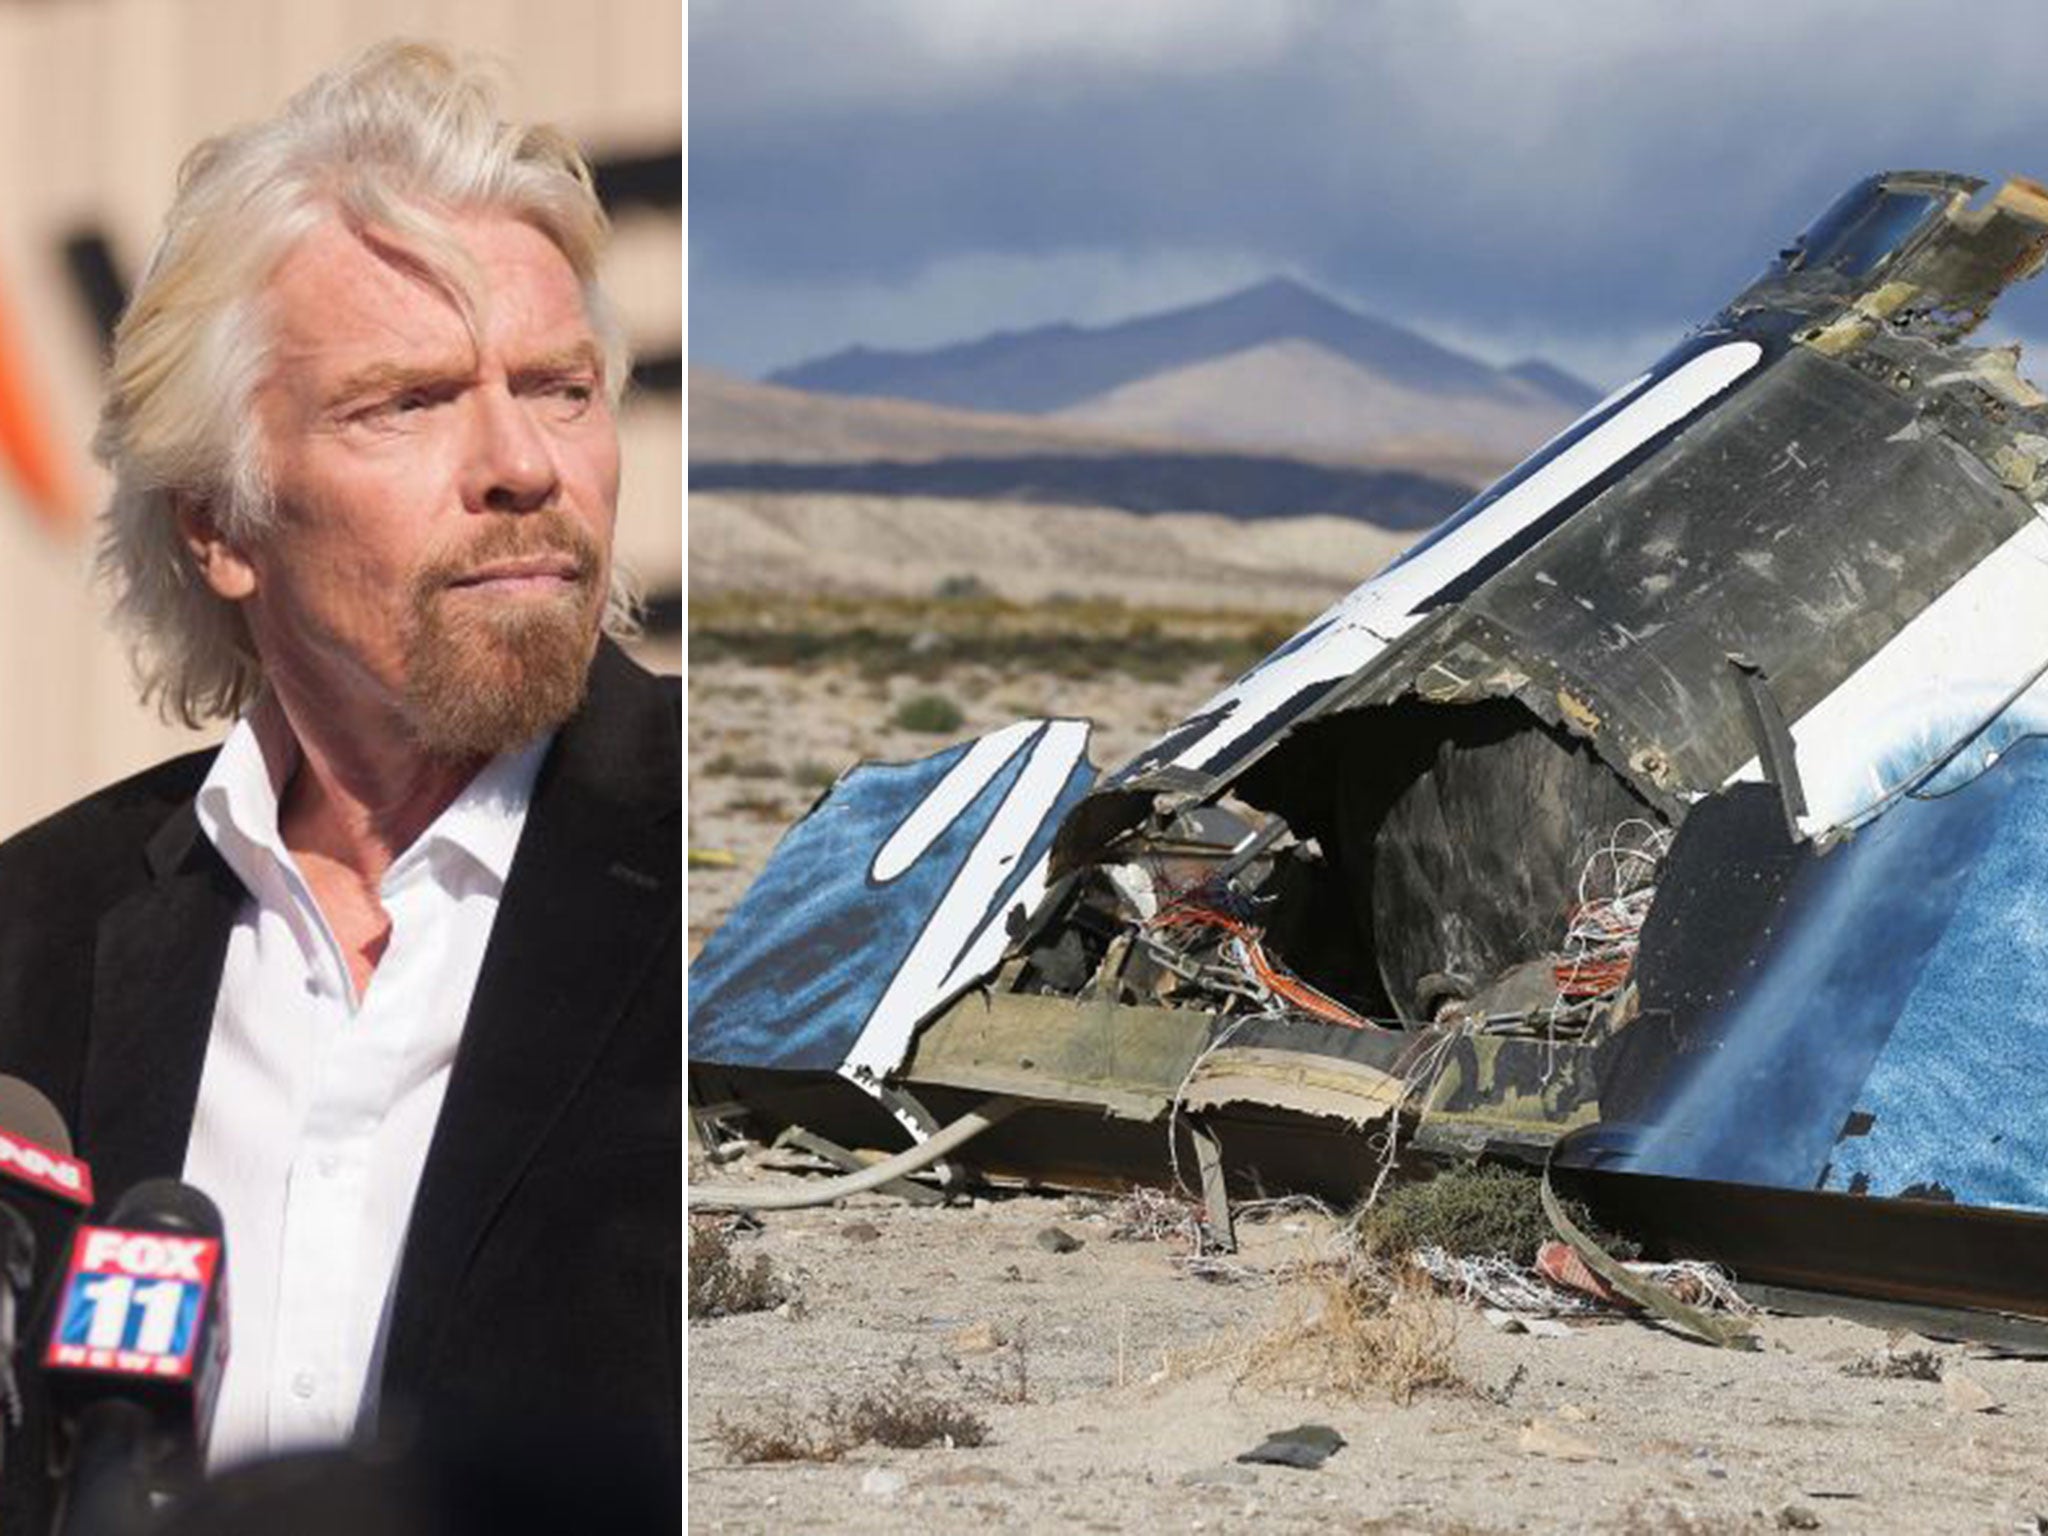 The investigation into why Virgin Galactic's SpaceShipTwo aircraft crashed on Friday is expected to take a year to complete